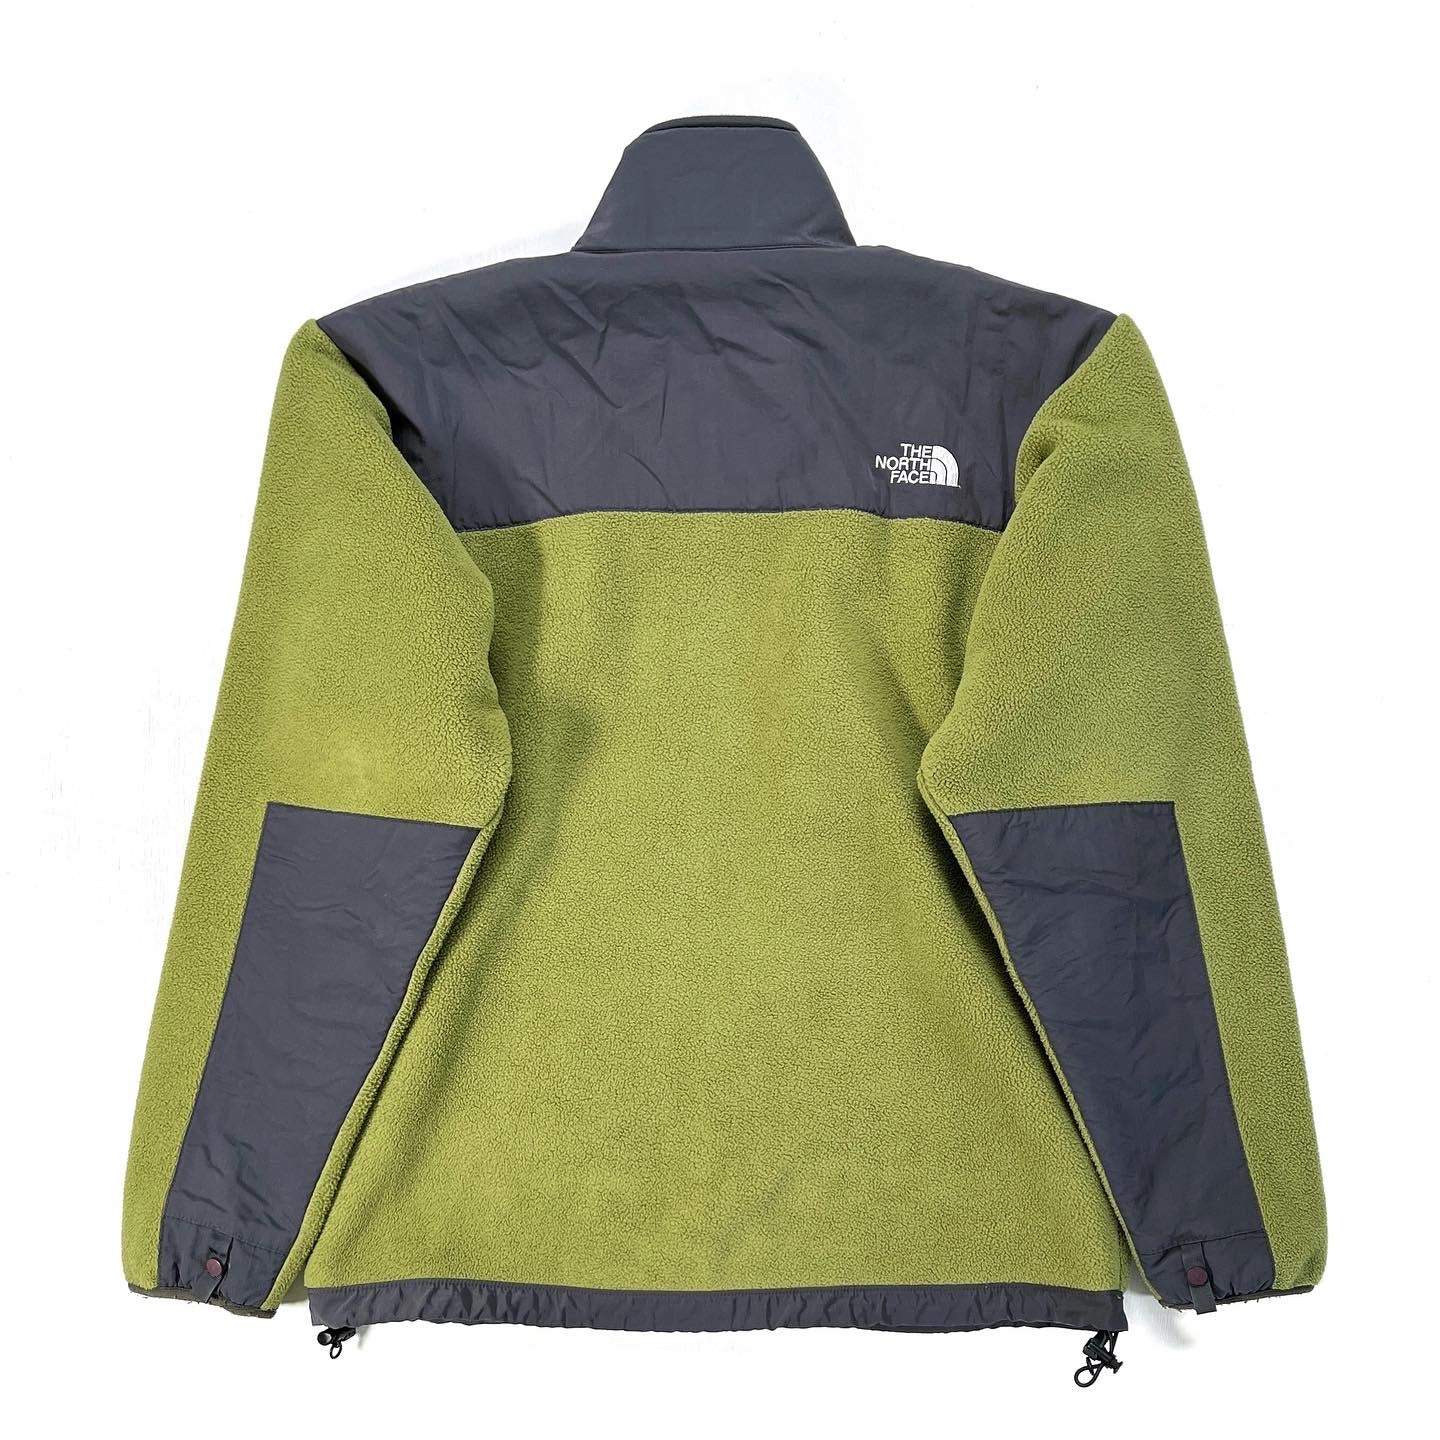 2000s The North Face Denali Fleece Jacket, Olive & Charcoal (S/M)